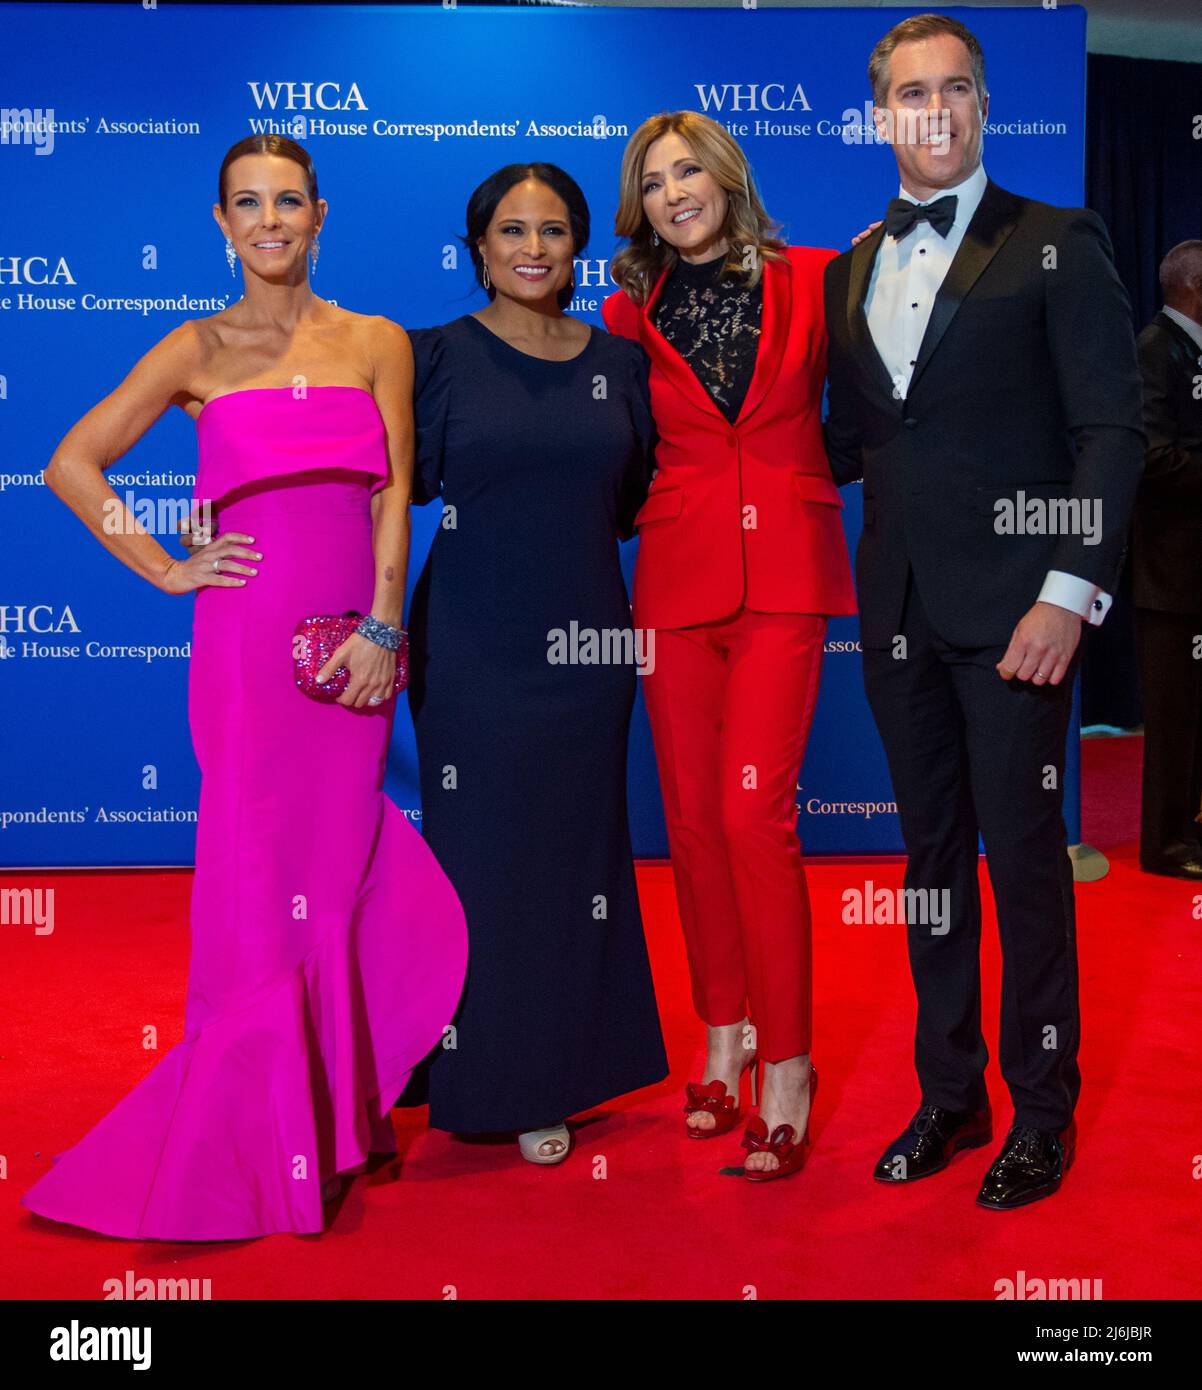 Stephanie Ruhle, left, Kristen Welker, second from left, Chris Jansing, second from right, and Peter Alexander, right, arrive for the 2022 White House Correspondents Association Annual Dinner at the Washington Hilton Hotel in Washington, DC on Saturday, April 30, 2022.  This is the first time since 2019 that the WHCA has held its annual dinner due to the COVID-19 pandemic. Credit: Rod Lamkey / CNP/Sipa USA Stock Photo